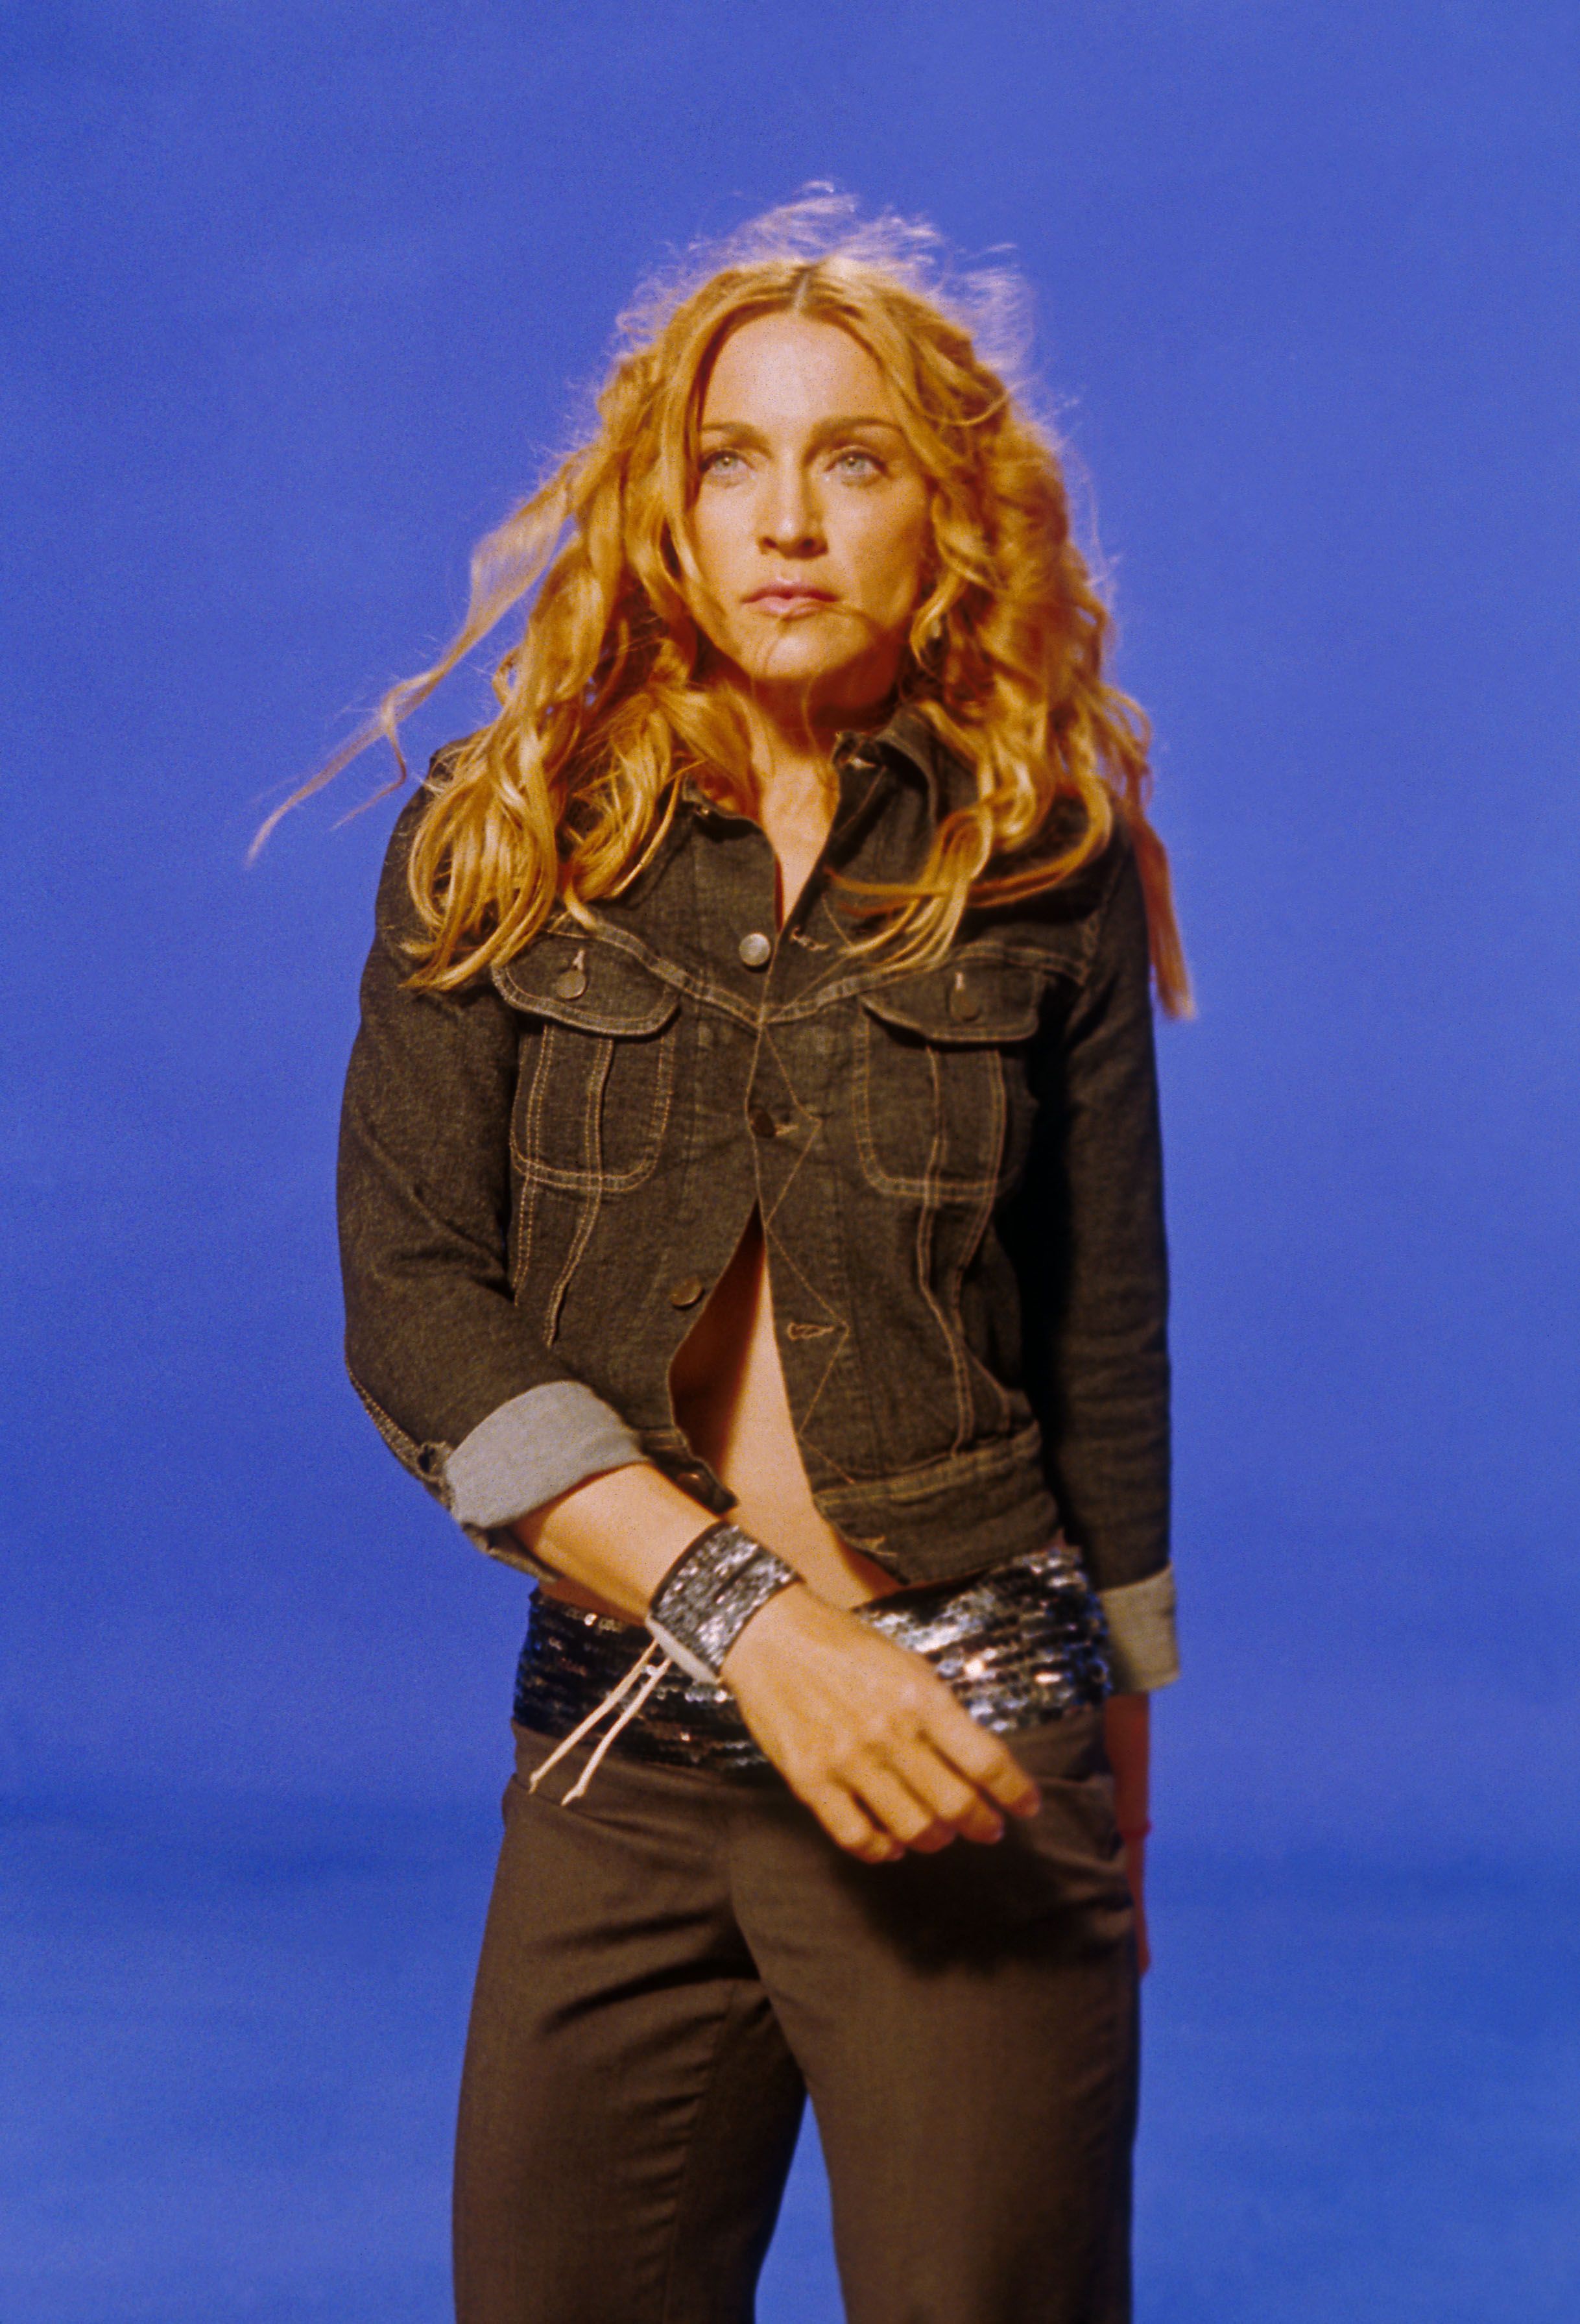 Madonna on the set of her "Ray of Light" video on September 12, 1998 | Photo: Frank Micelotta/ImageDirect/Getty Images